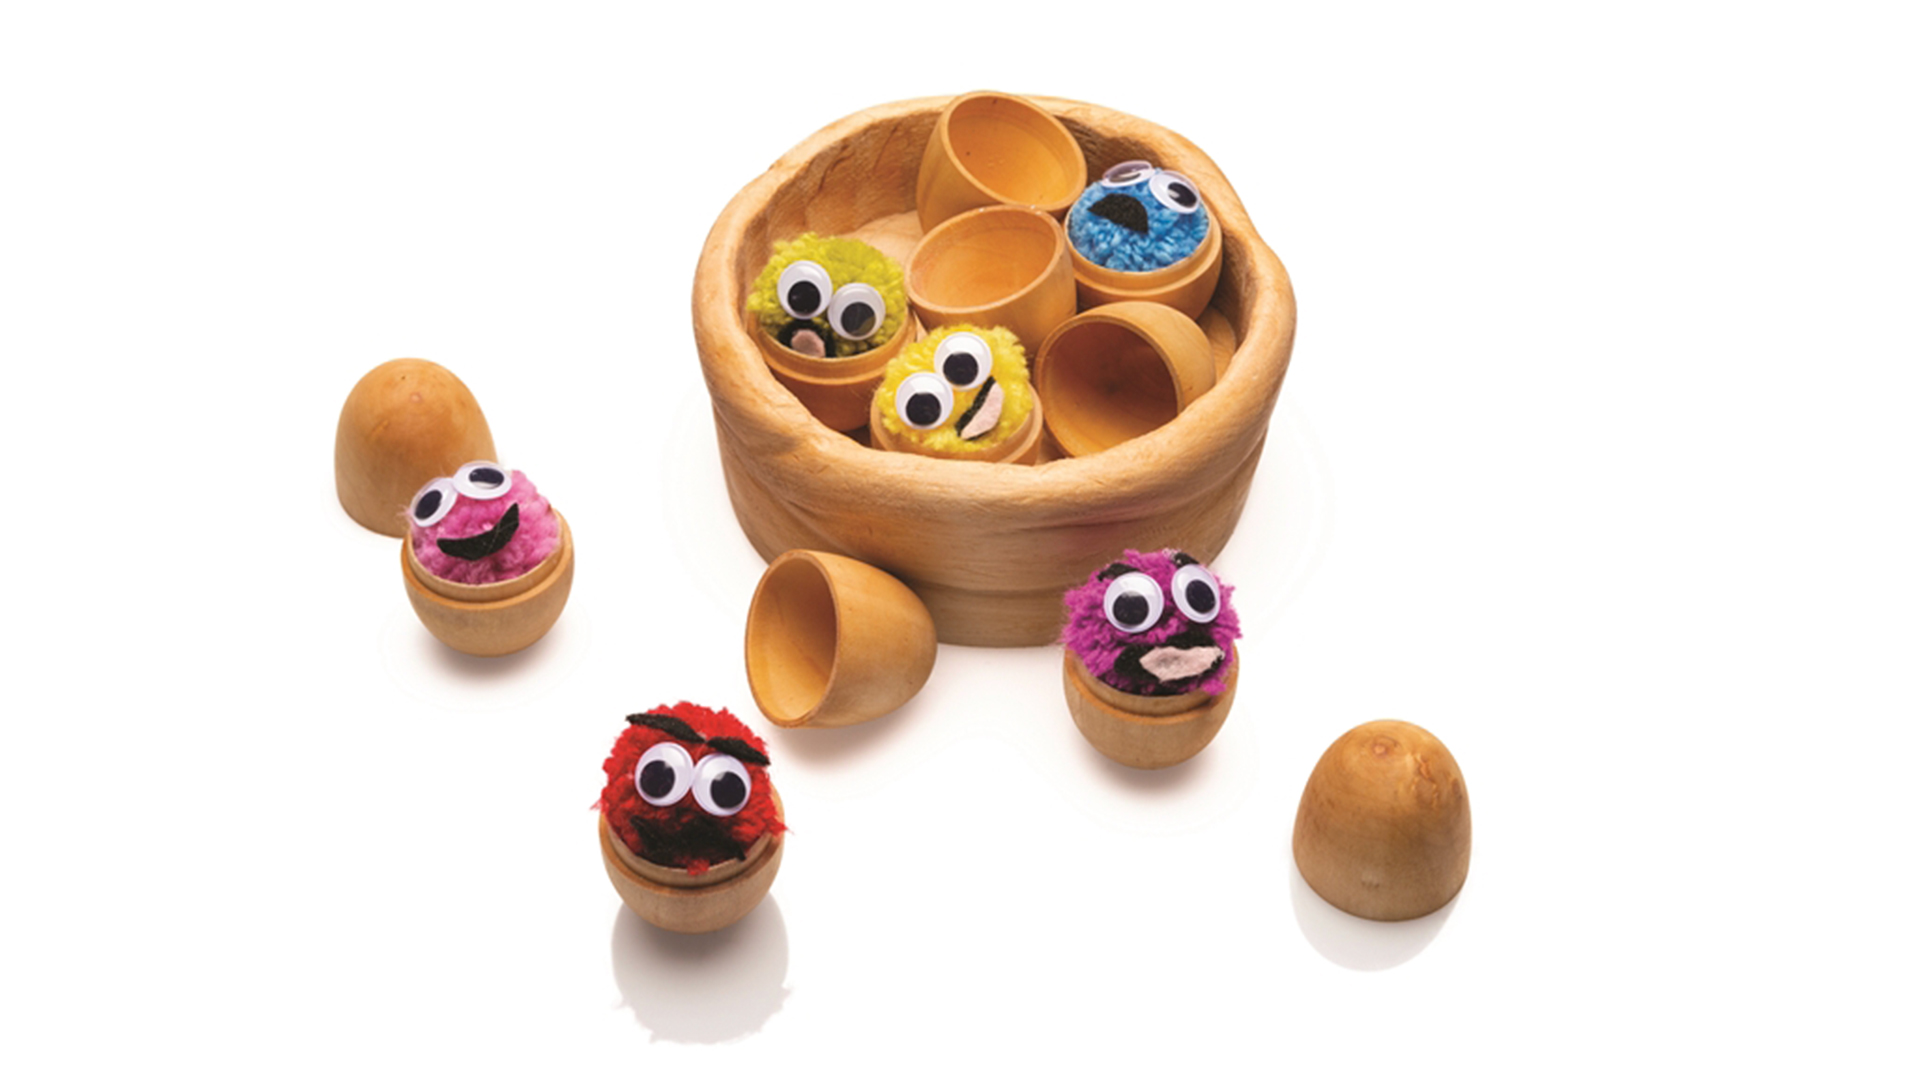 All wooden eggs separated in half showing a colorful ball creature inside each